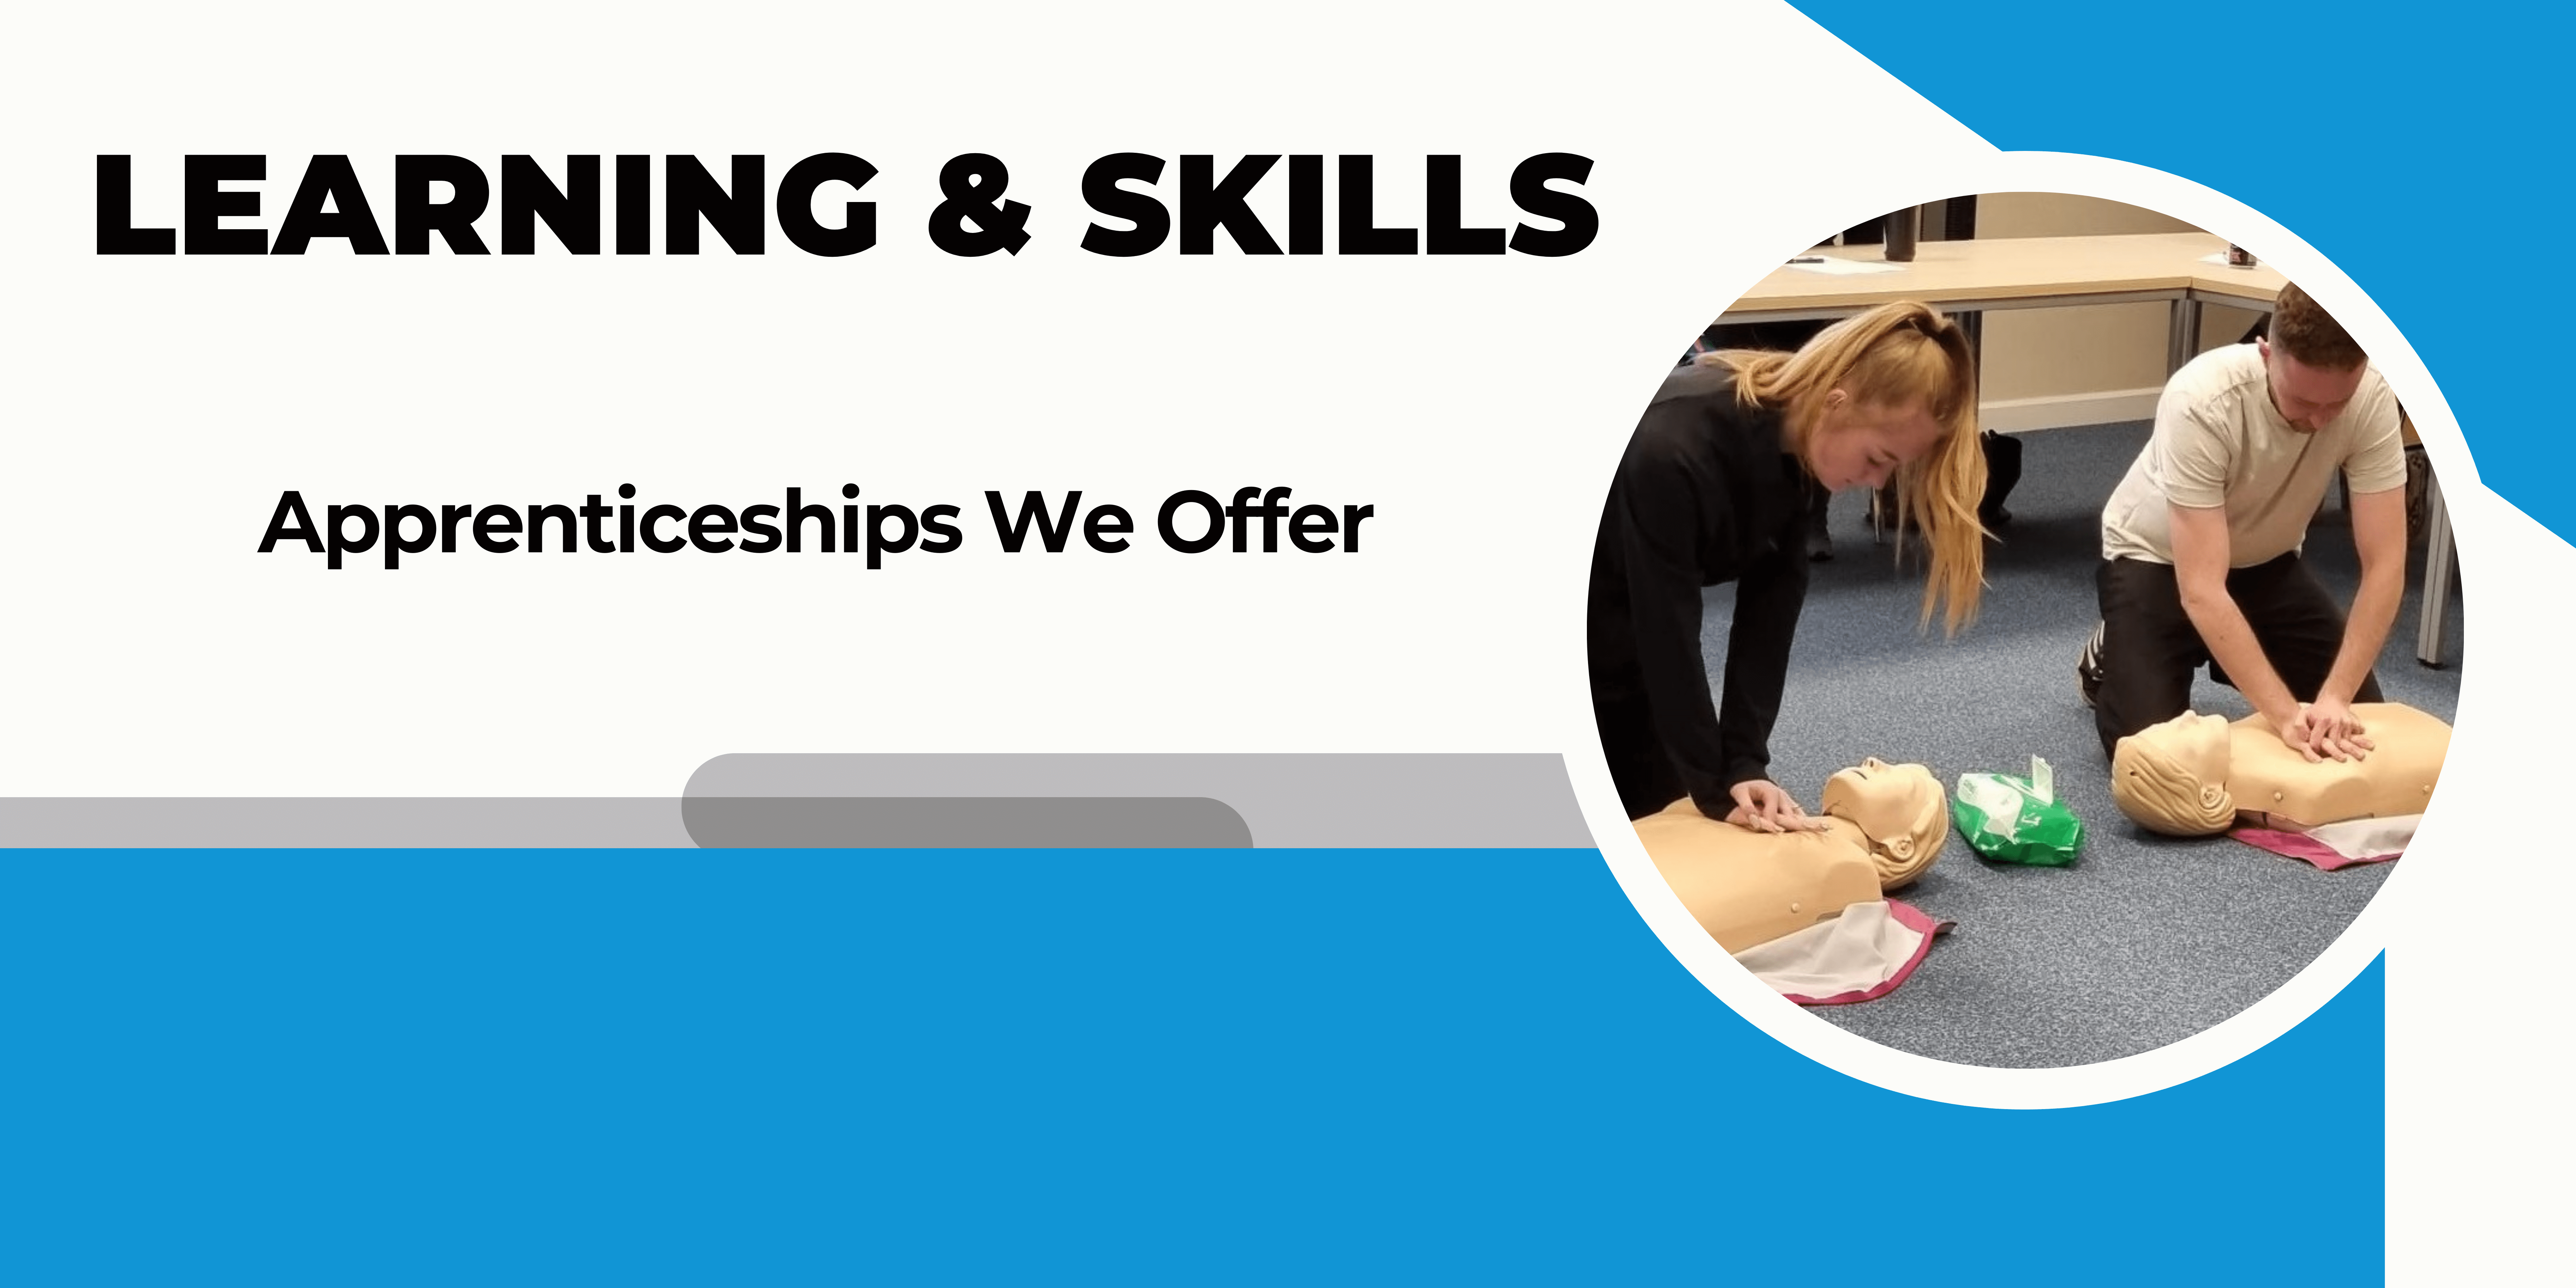 "Apprenticeships we offer with image of apprentice giving CPR to doll"